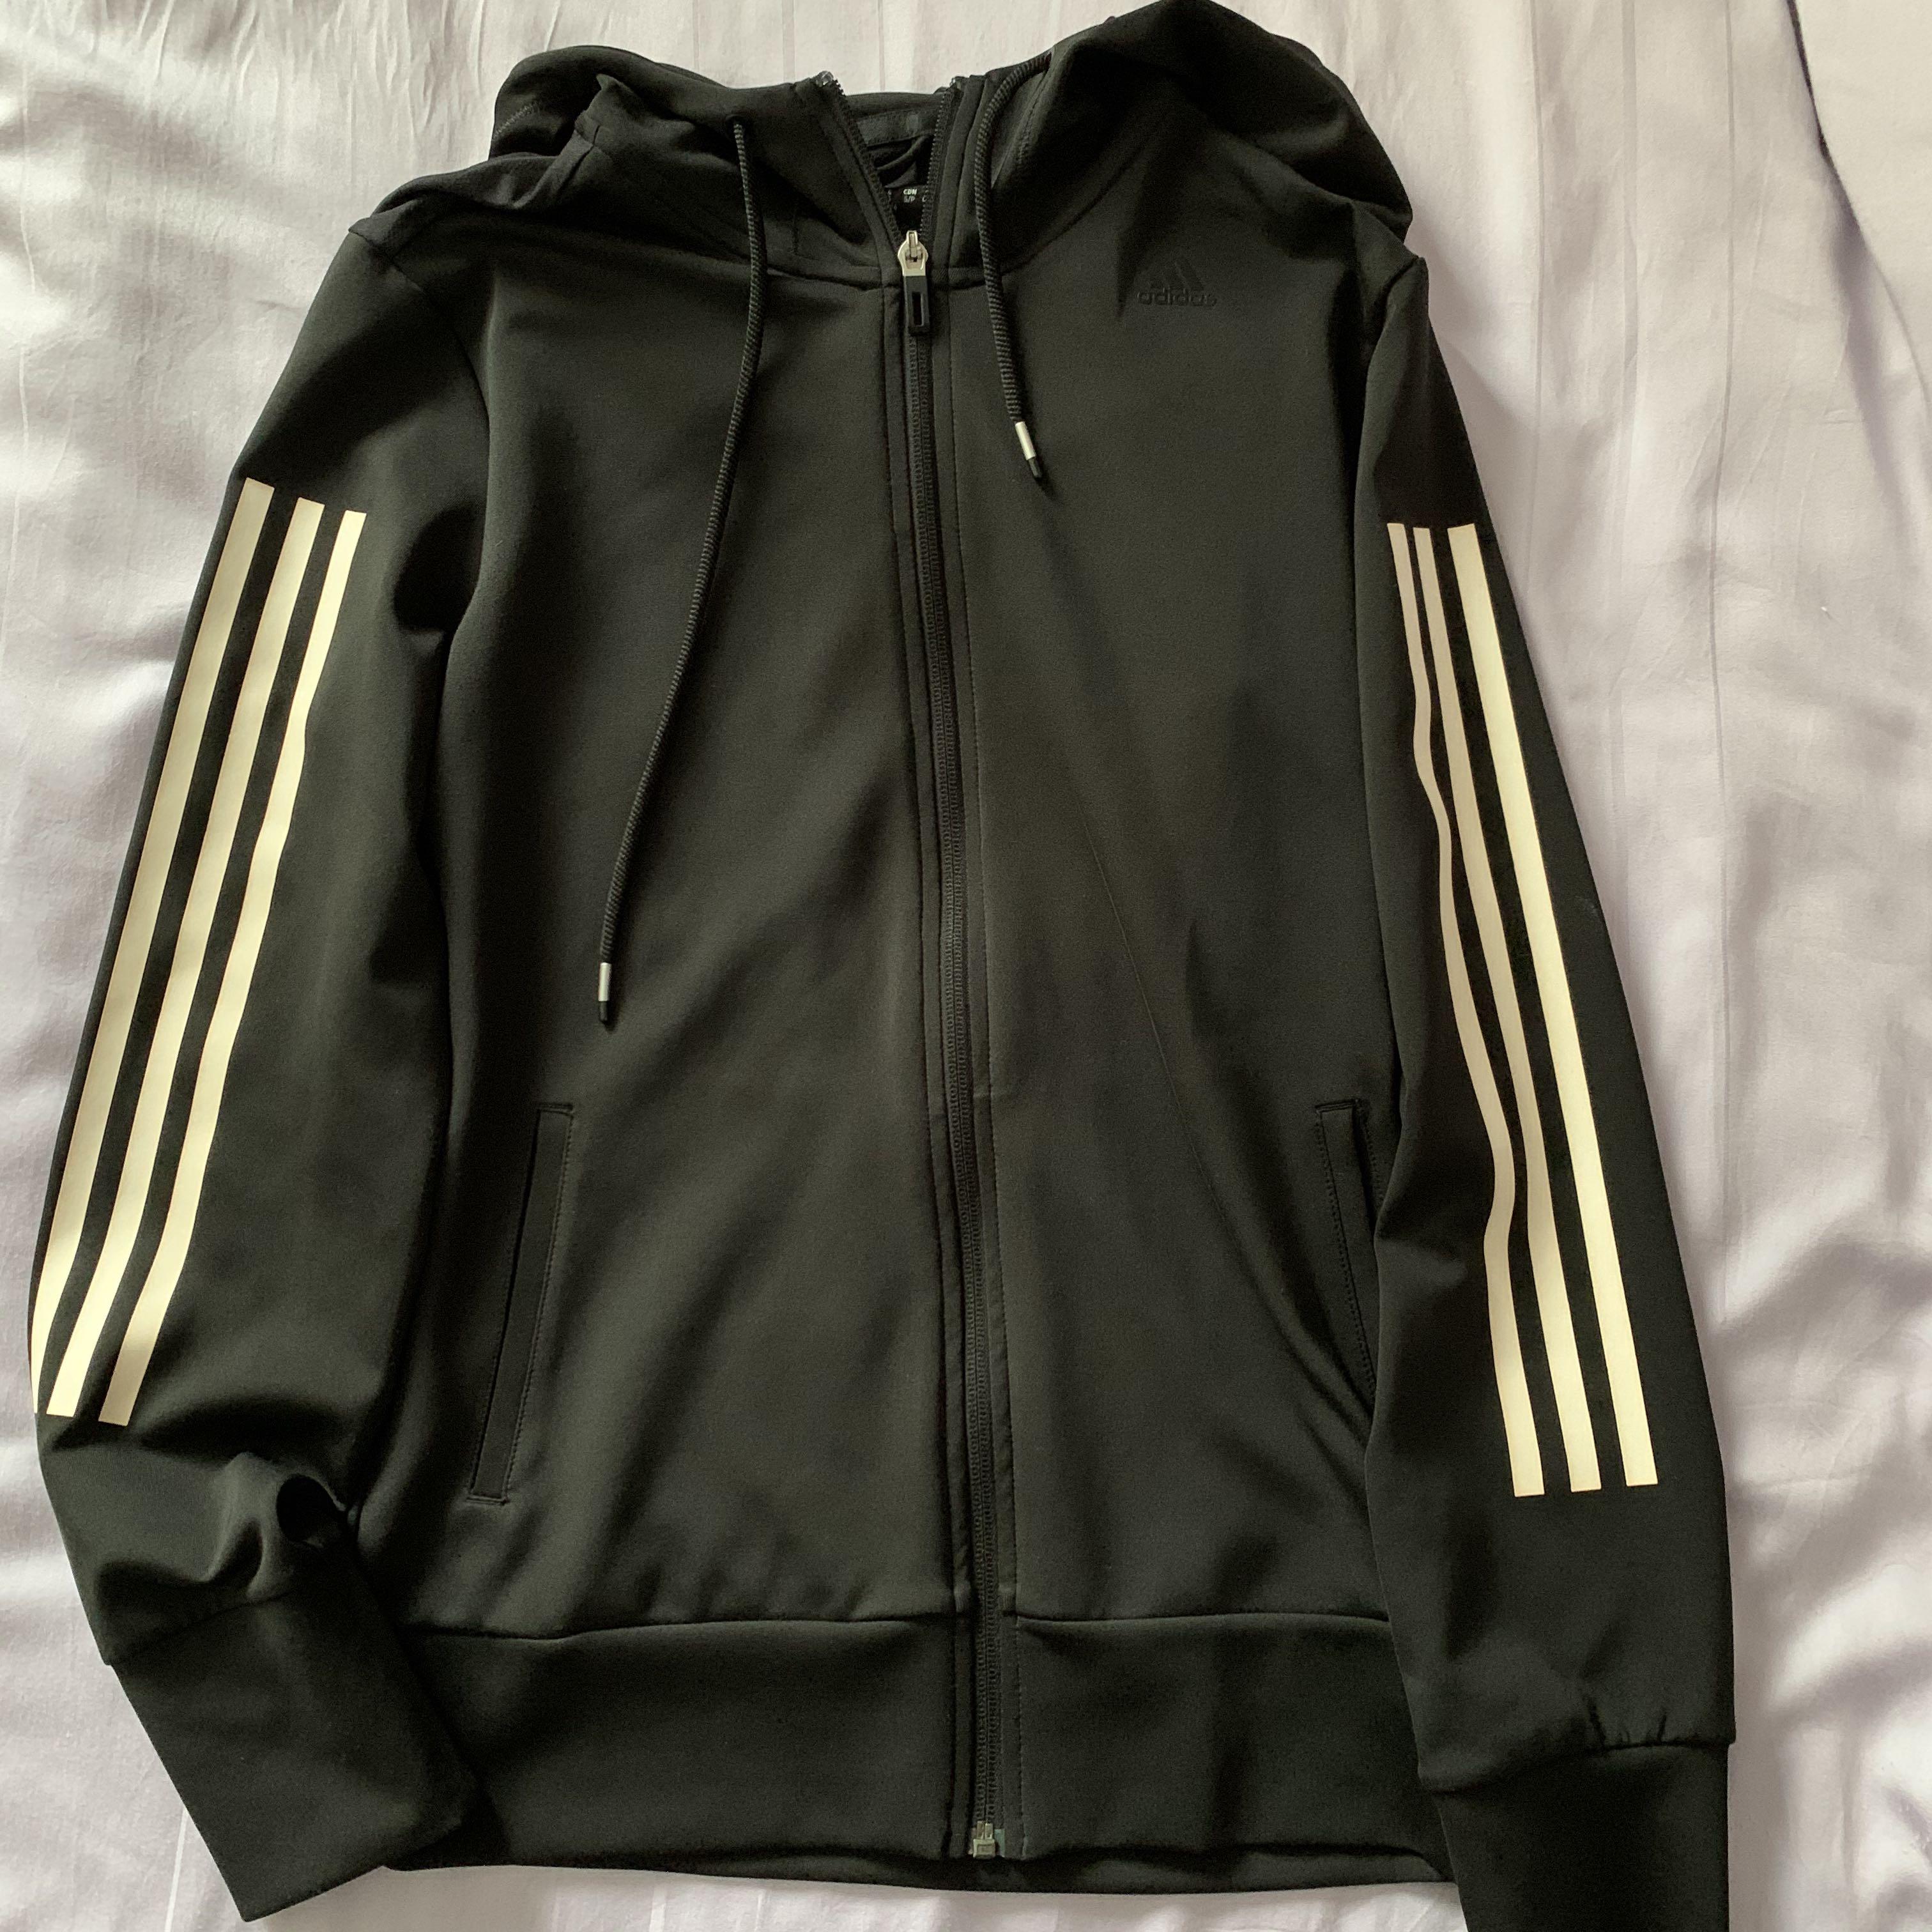 Adidas Climacool Jacket, Women's Fashion, Clothes, Outerwear on Carousell